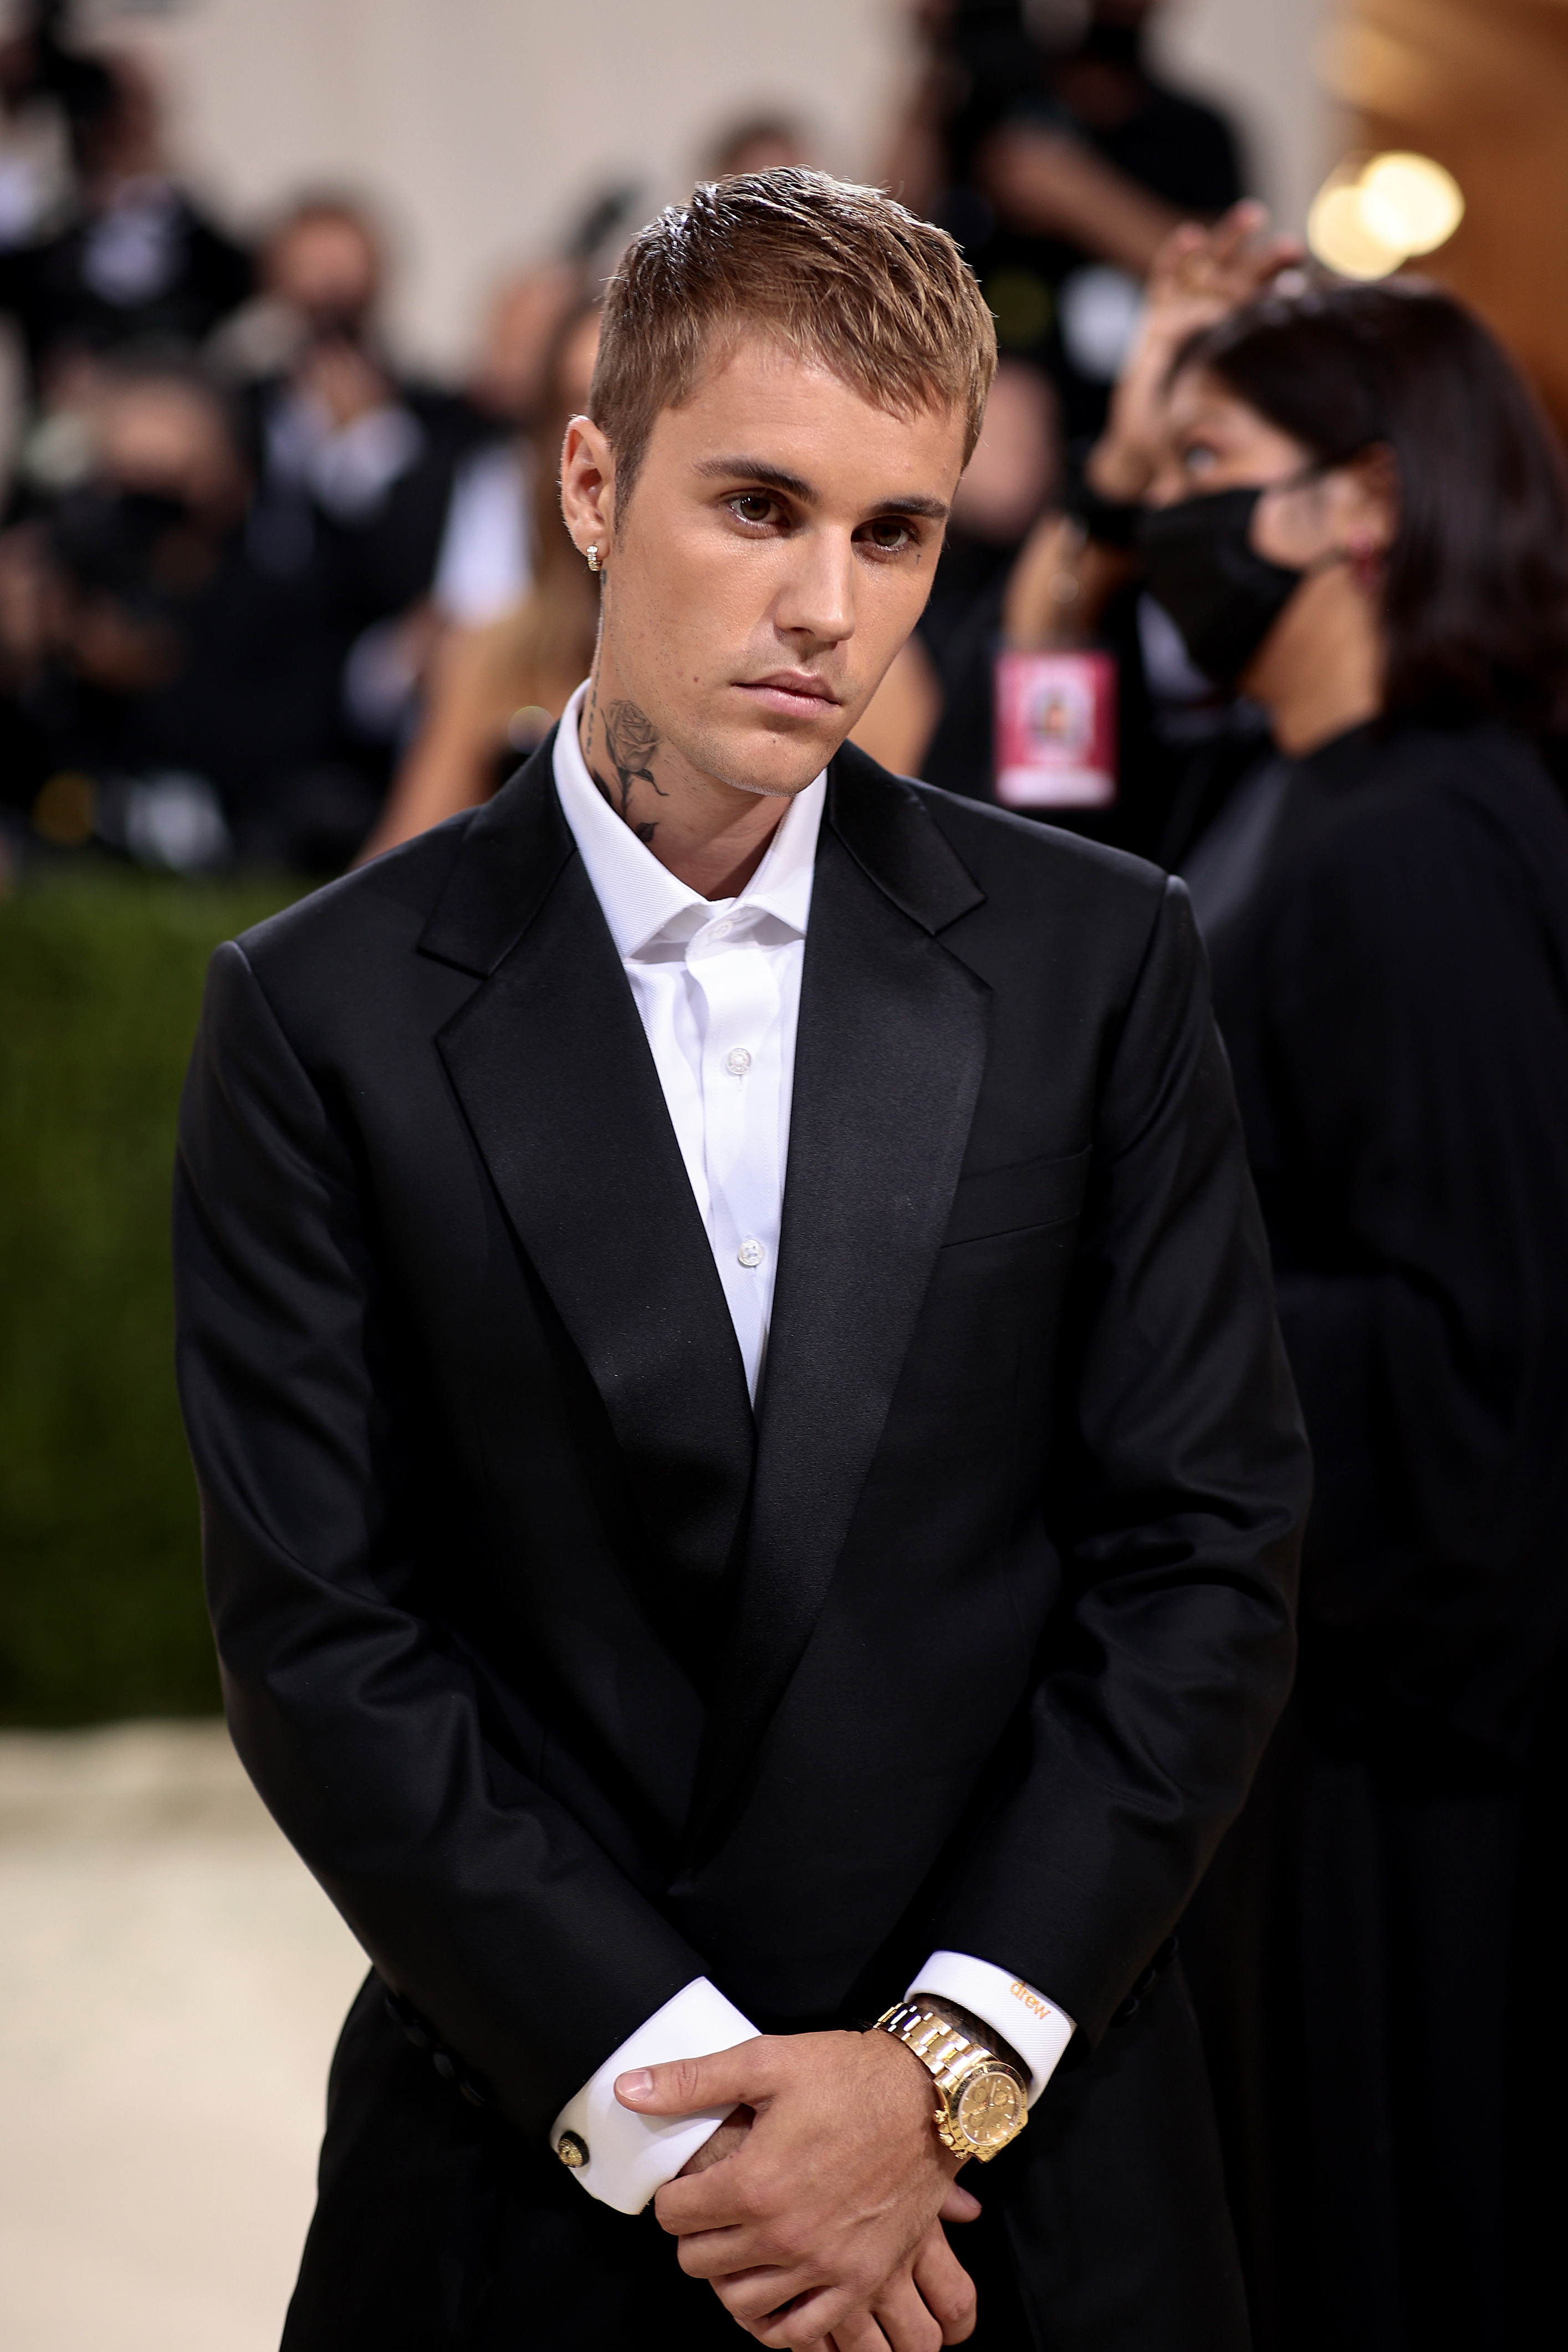 Justin Bieber attends the Met Gala "Celebrating In America: A Lexicon of Fashion" at the Metropolitan Museum of Art in New York City on September 13, 2021. | Source: Getty Images